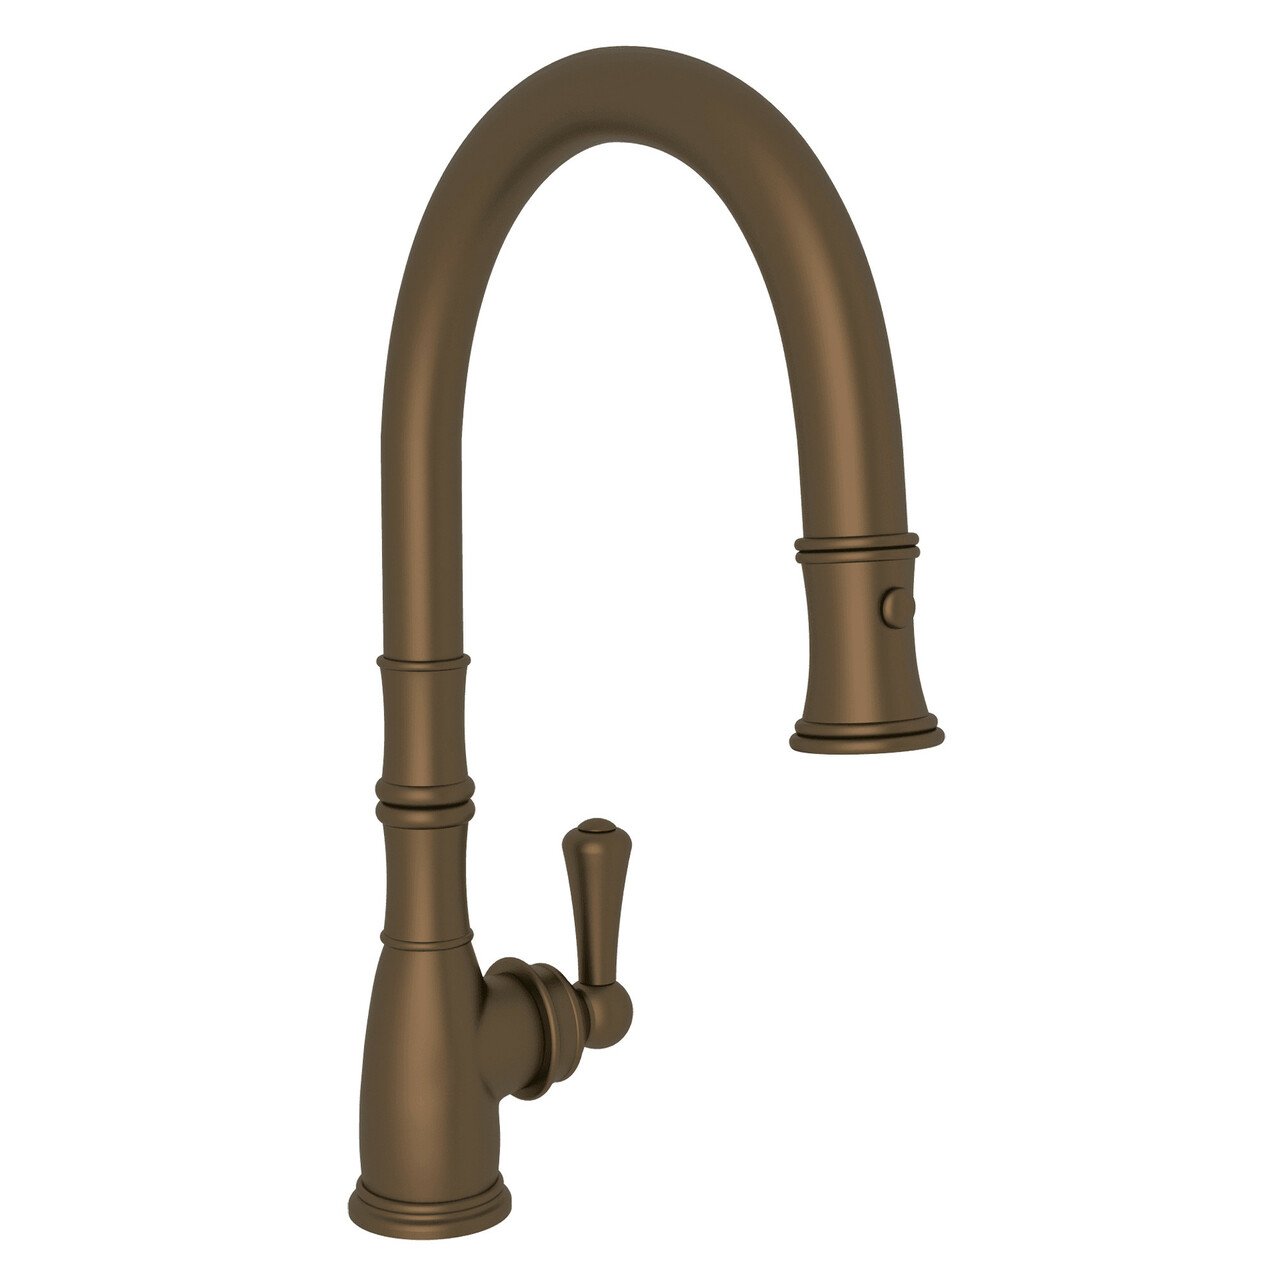 Perrin & Rowe Georgian Era Bridge Kitchen Faucet with Sidespray -  Unlacquered Brass with Metal Lever Handle